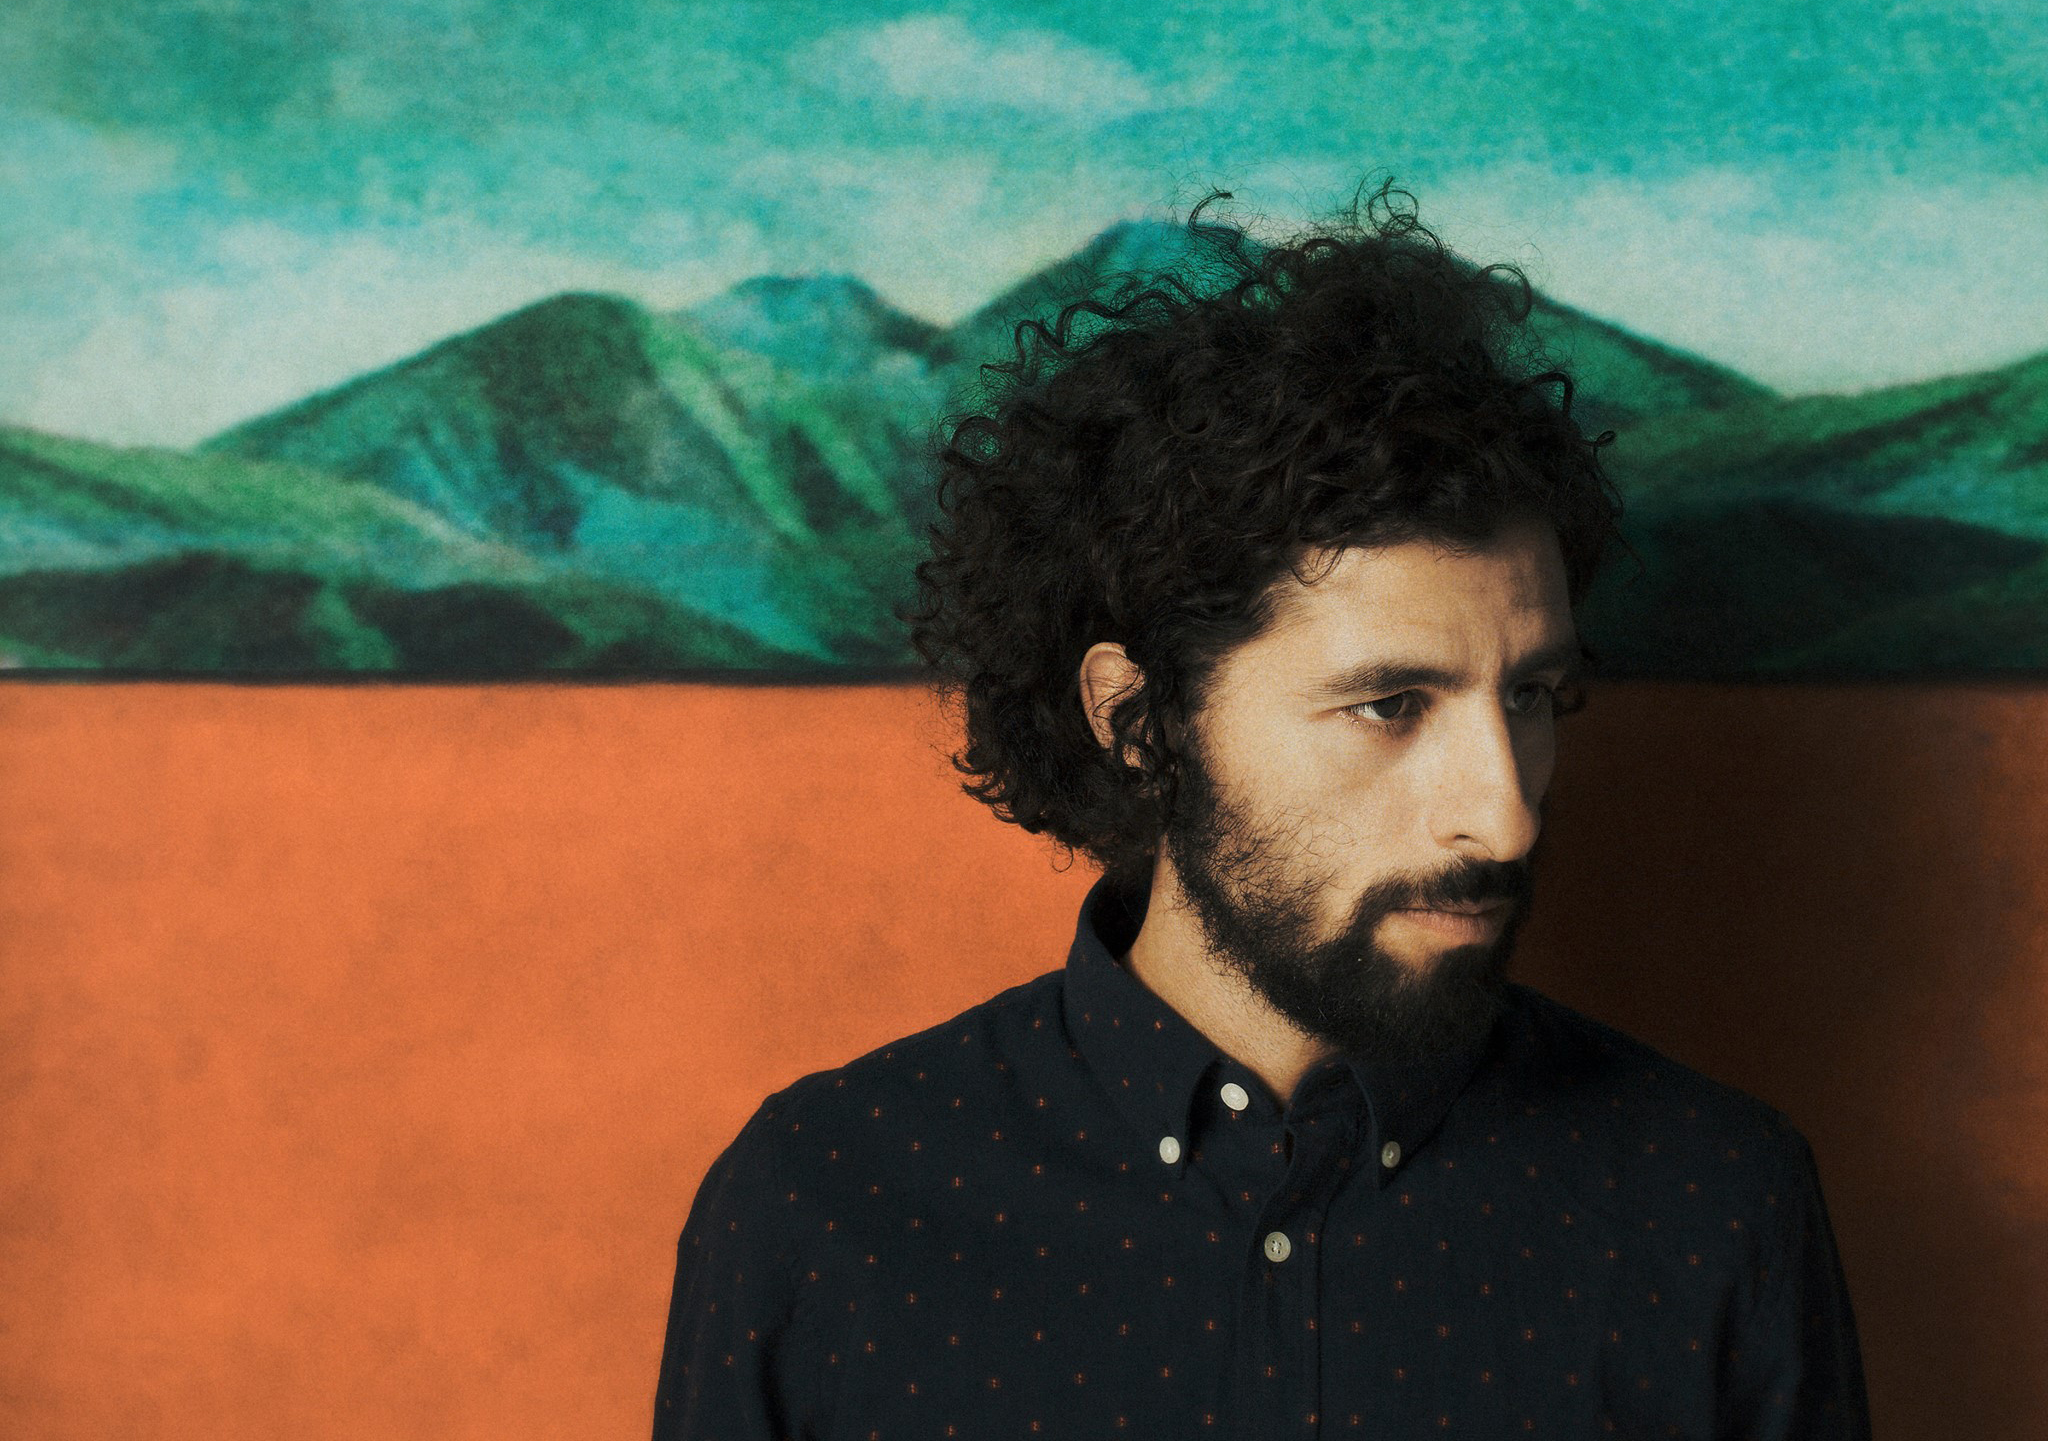 José González unveils a beautiful video for ‘With the Ink of a Ghost’